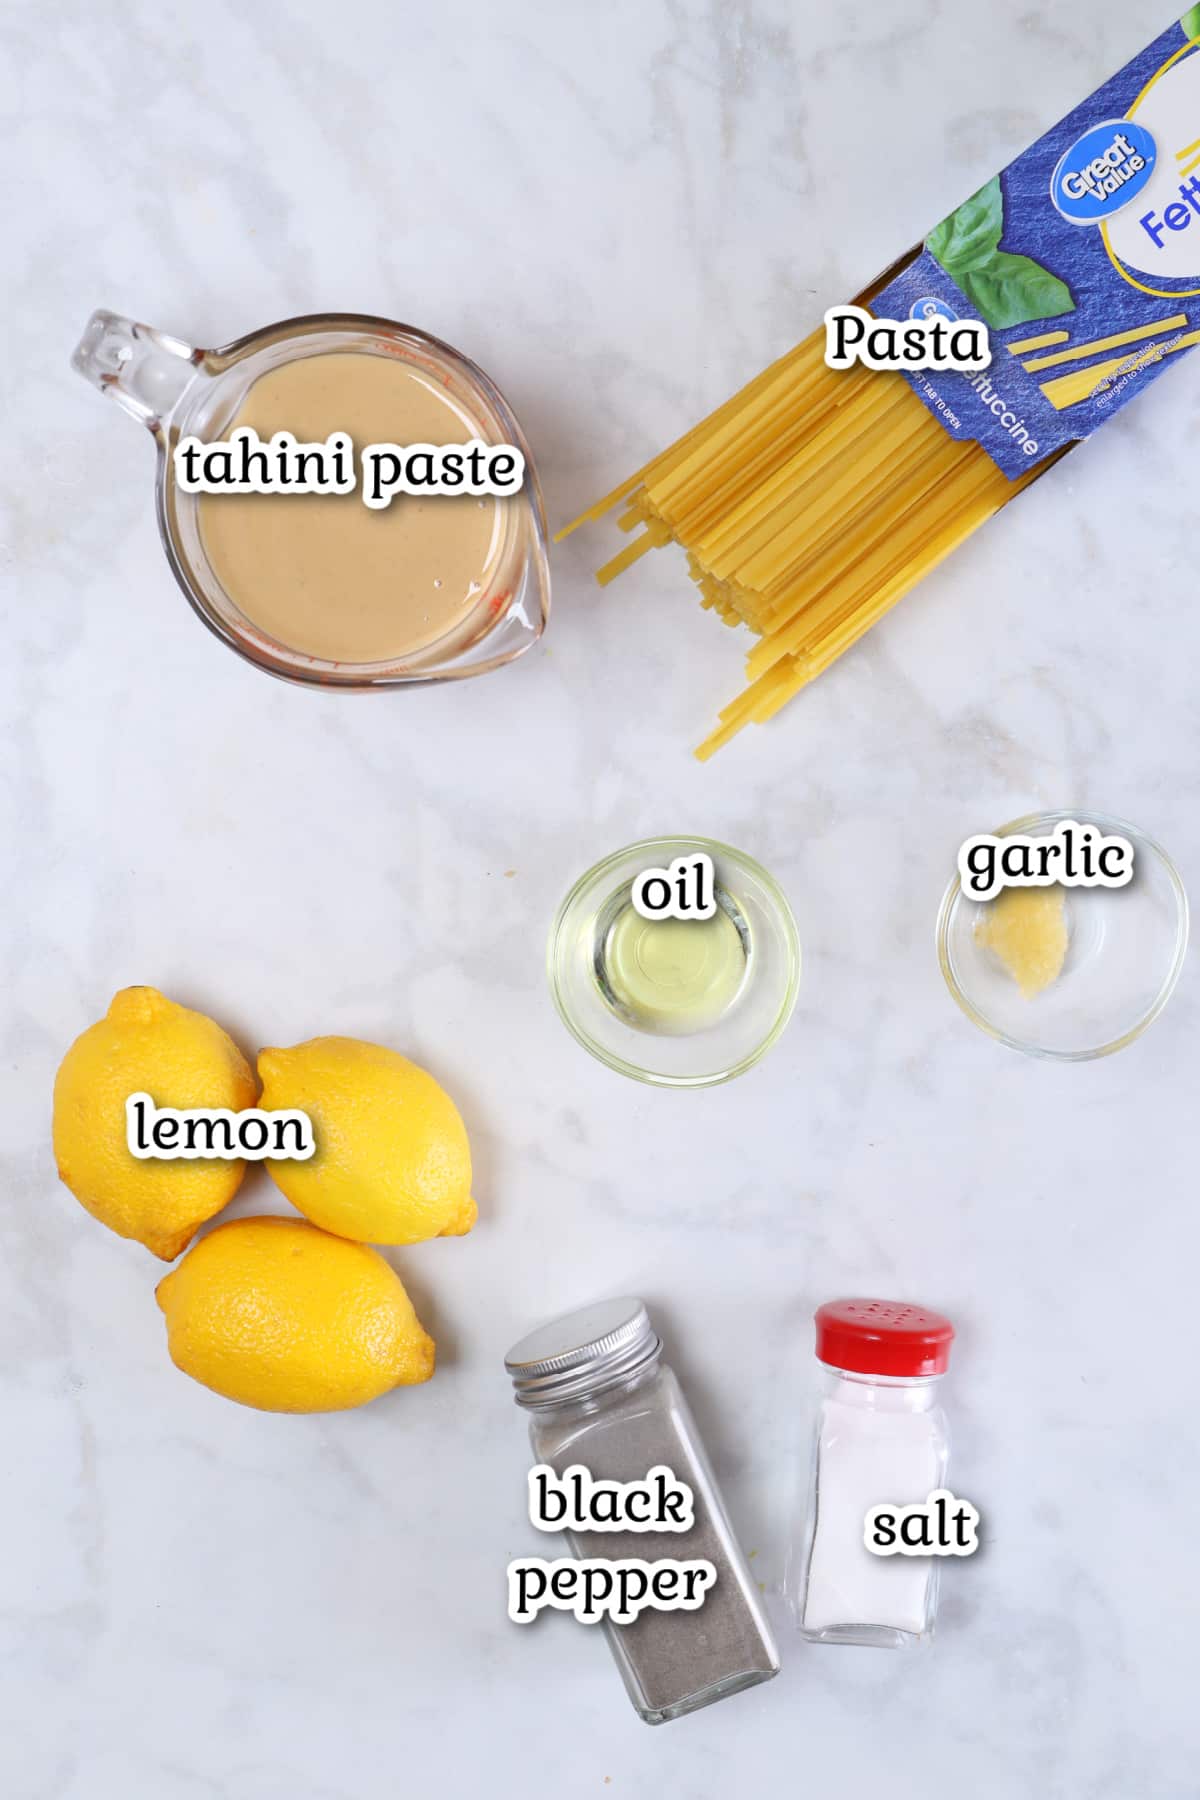 Ingredients for the recipe on a marble counter.